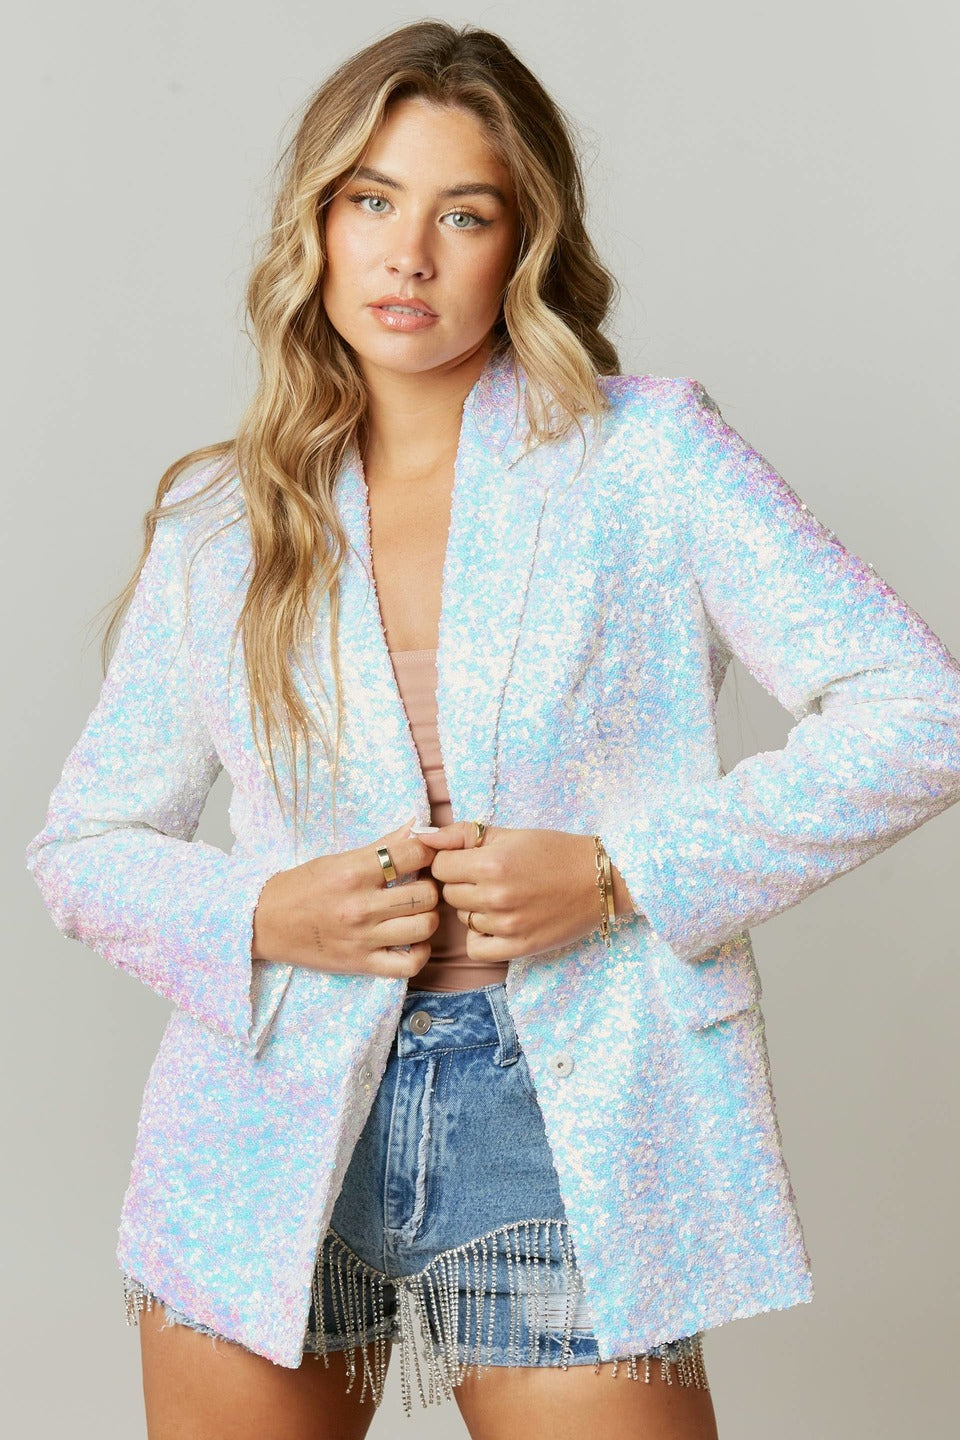 NADINE Sequin Blazer-Blazers-Bloom West Boutique-Shop with Bloom West Boutique, Women's Fashion Boutique, Located in Houma, Louisiana